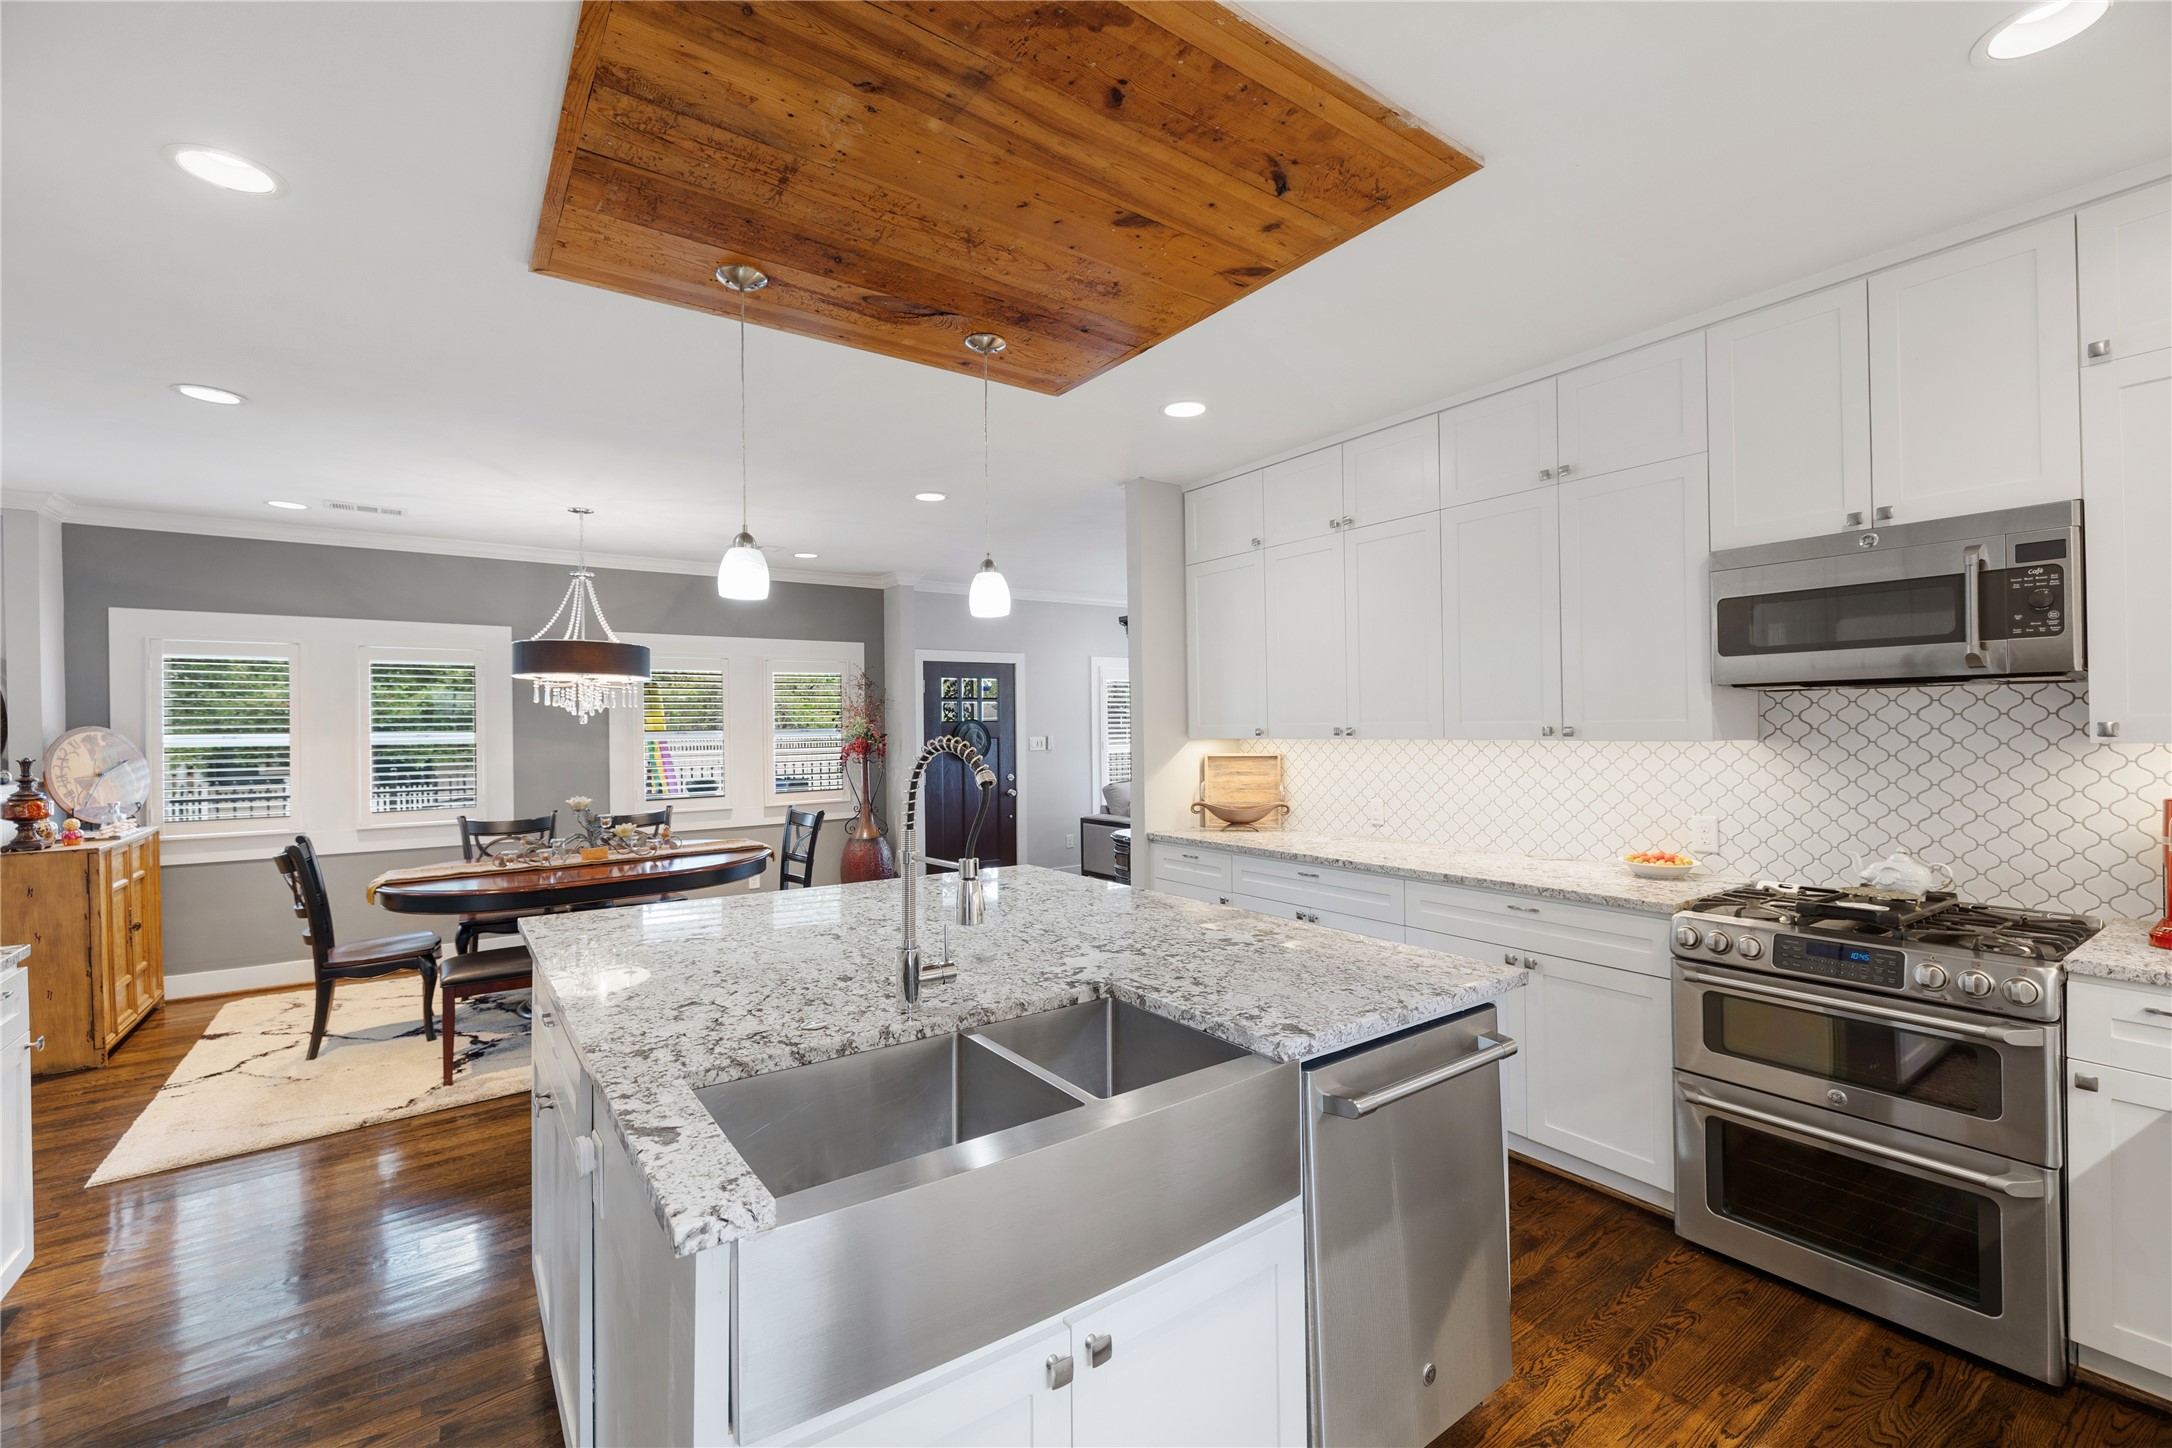 The kitchen is a chef’s dream. Fitted with gourmet appliances, pendant lighting, under-cabinet lighting, stainless steel farmhouse sink, and stunning granite countertops. You’re also going to love the generous amount of prep space and storage.